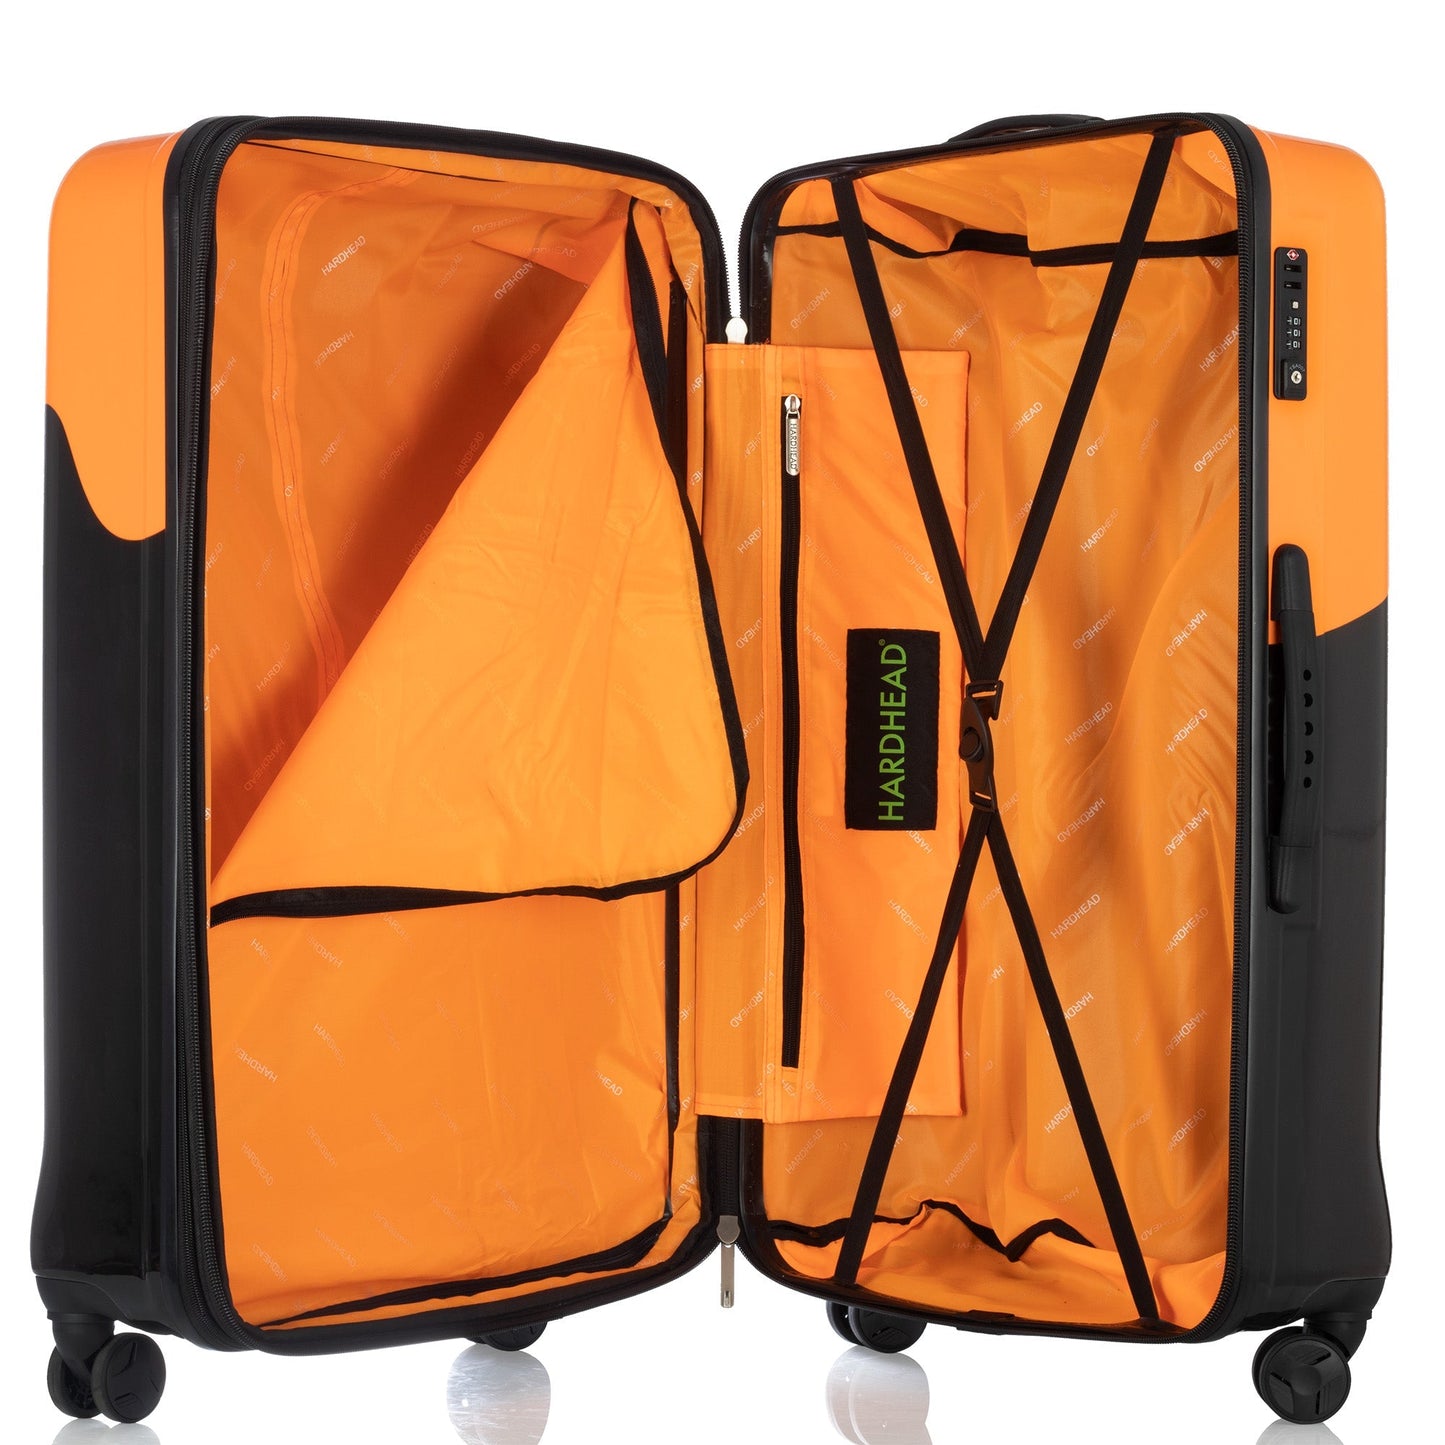 Melted Slime Collection Black with Orange/Yellow/Green Luggage 3 Piece Set (22/26/30") Suitcase Lock Spinner Hardshell